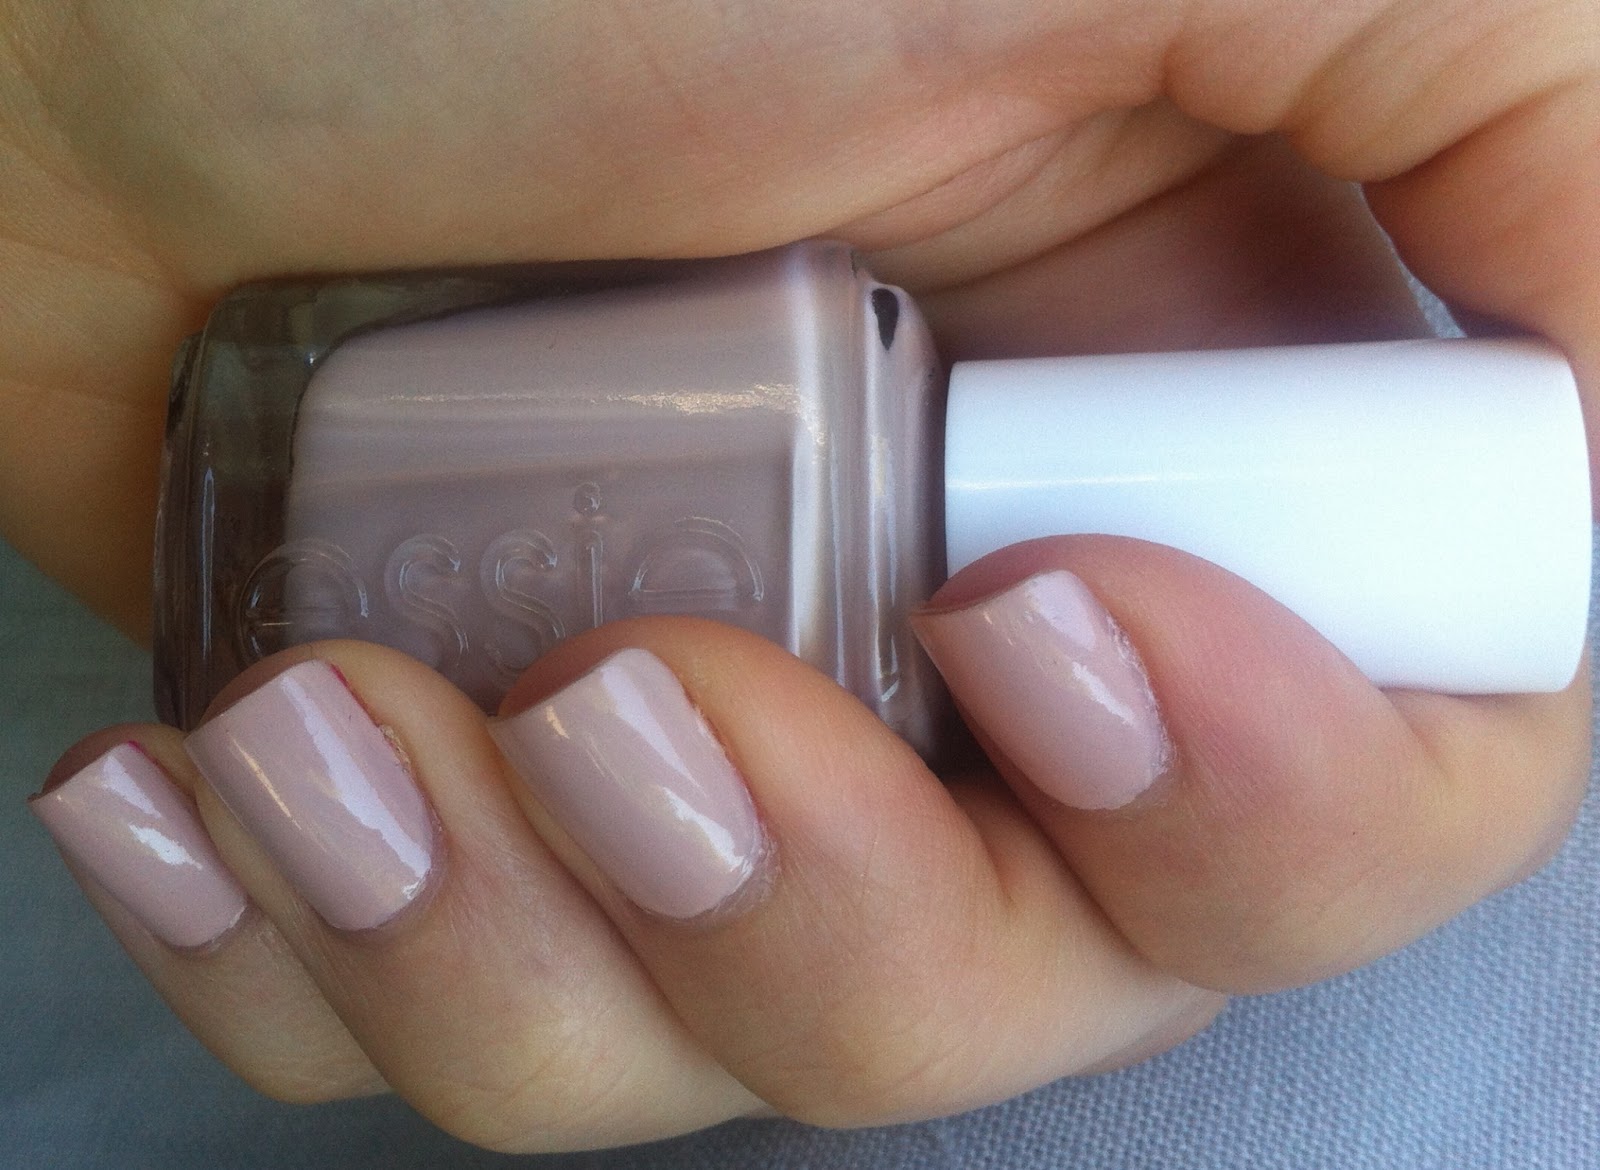 8. Essie Nail Polish in "Topless & Barefoot" - wide 9